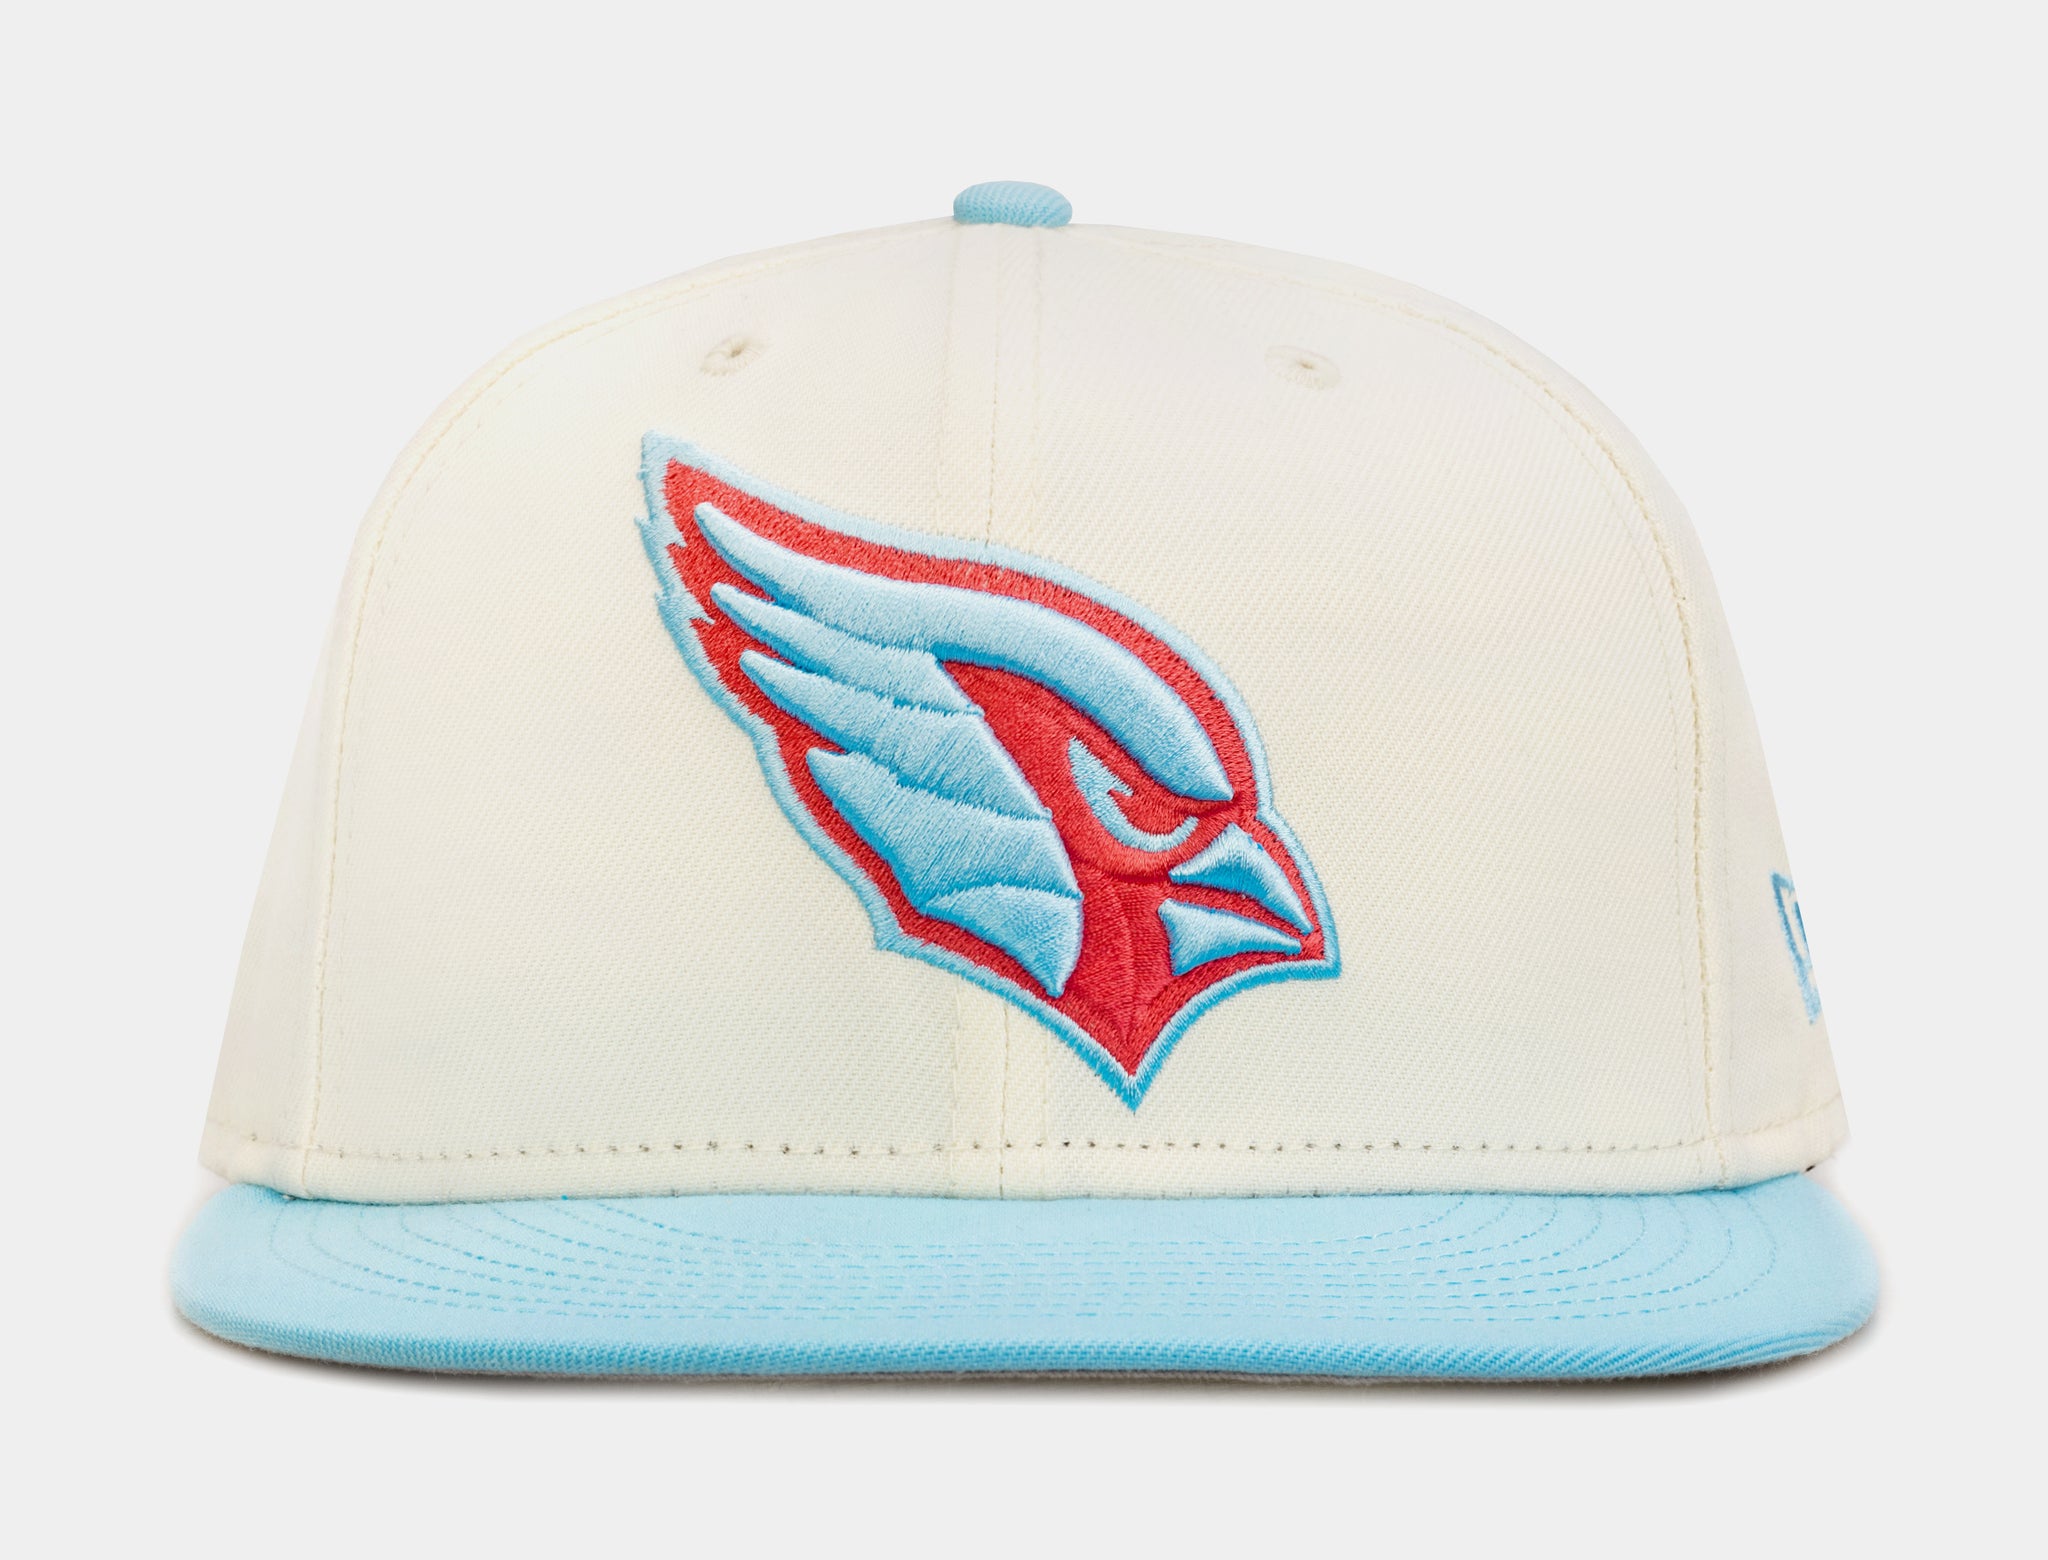 Arizona Cardinals Crest 9FIFTY Mens Snapback Hat (White/Red)